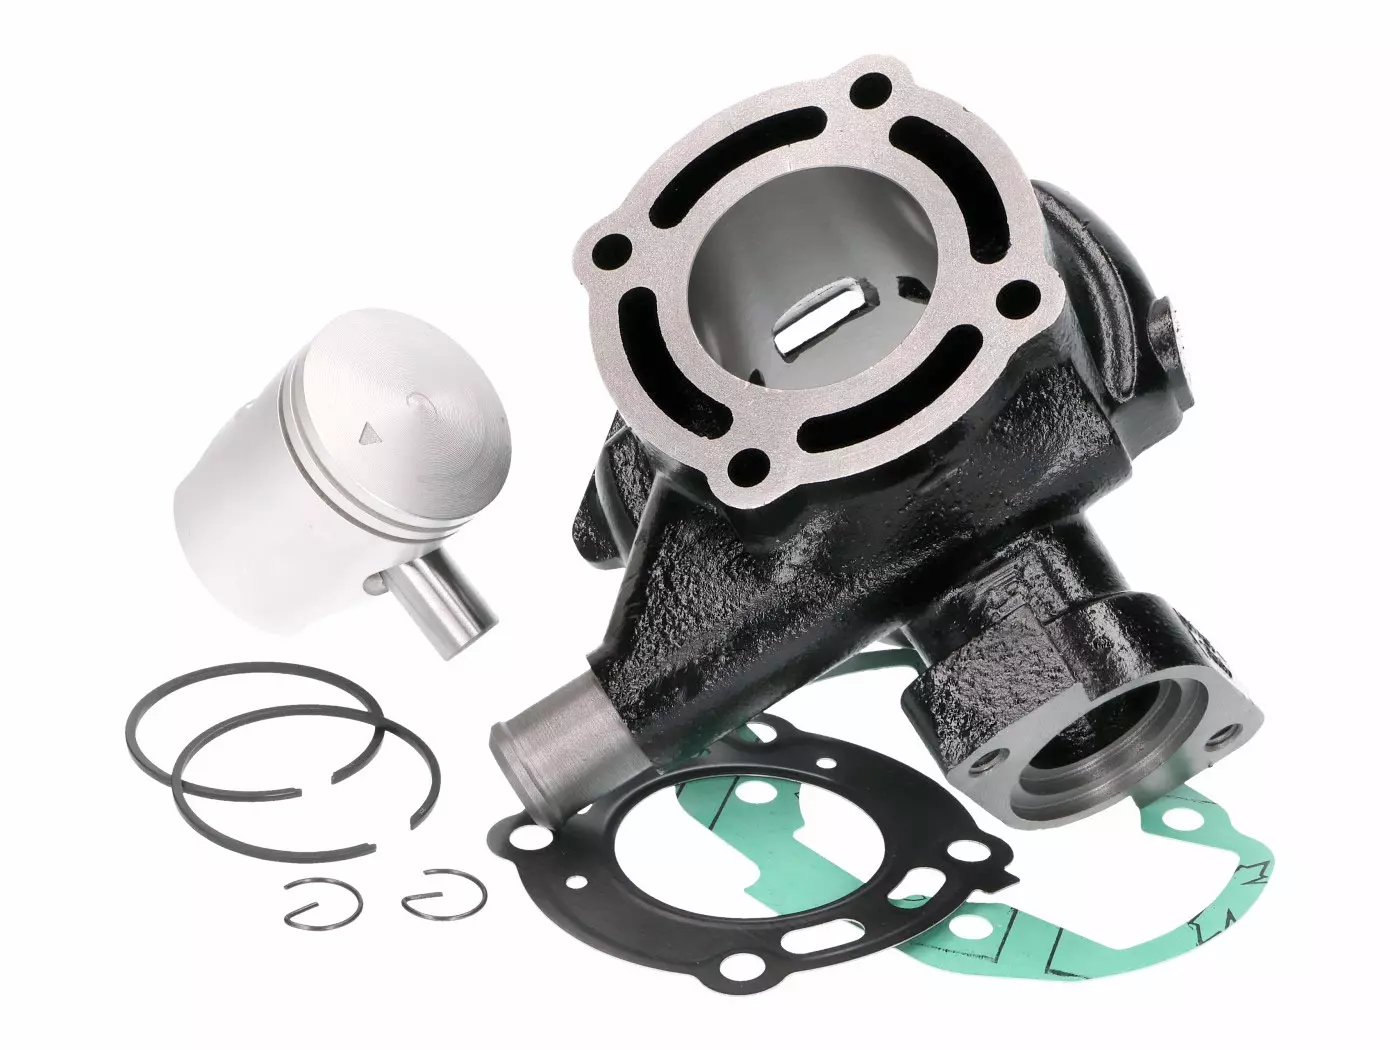 Cylinder Kit 50cc For Peugeot Speedfight 3/4 LC, Jet Force C-Tech 2013